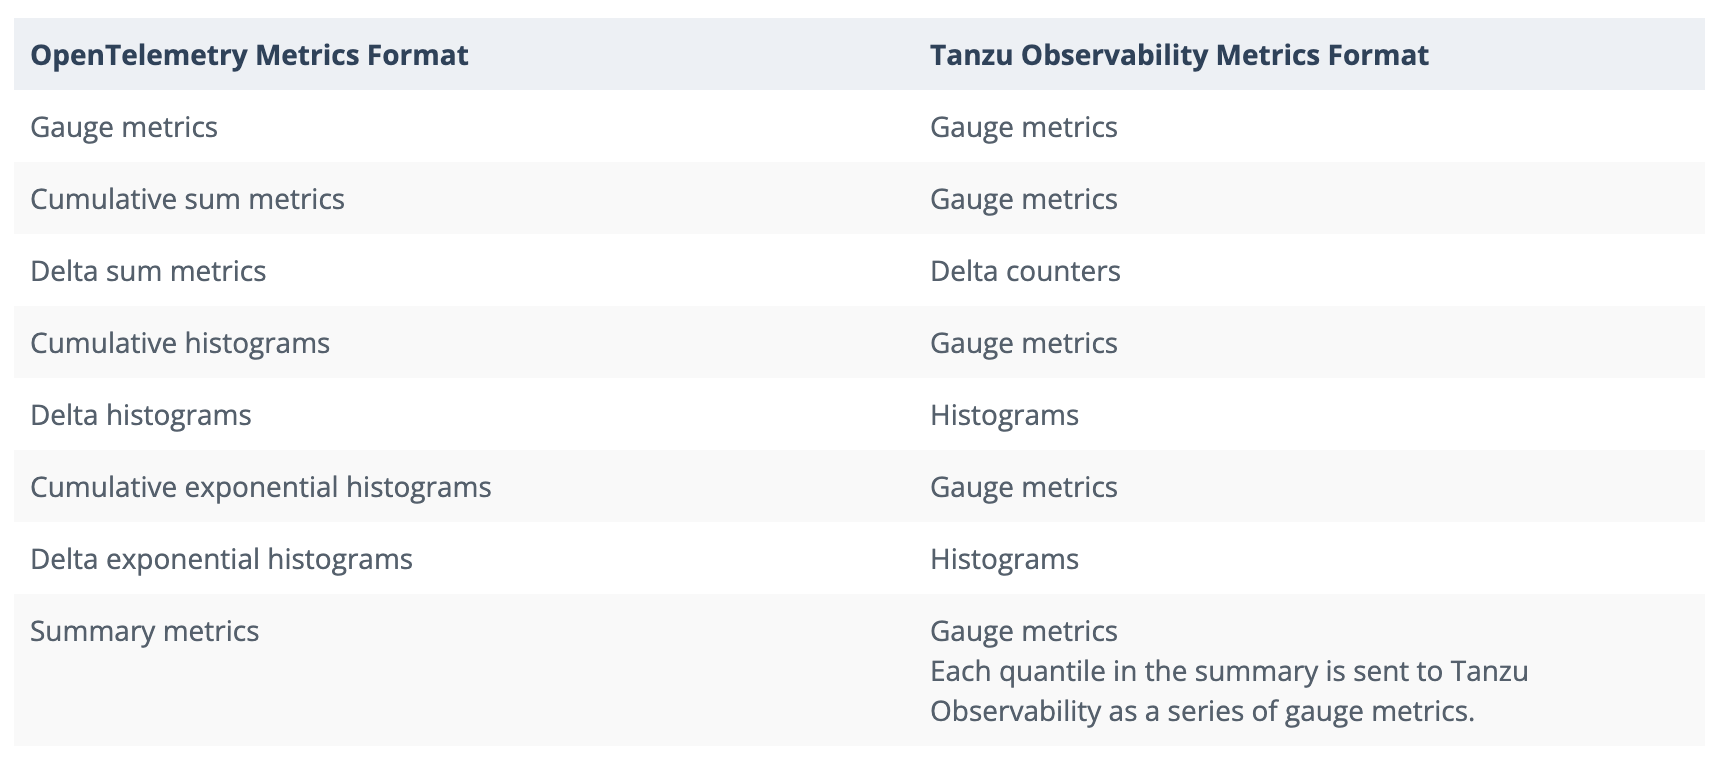 A table that shows how the OpenTelemetry metrics are converted to the Wavefront metrics format